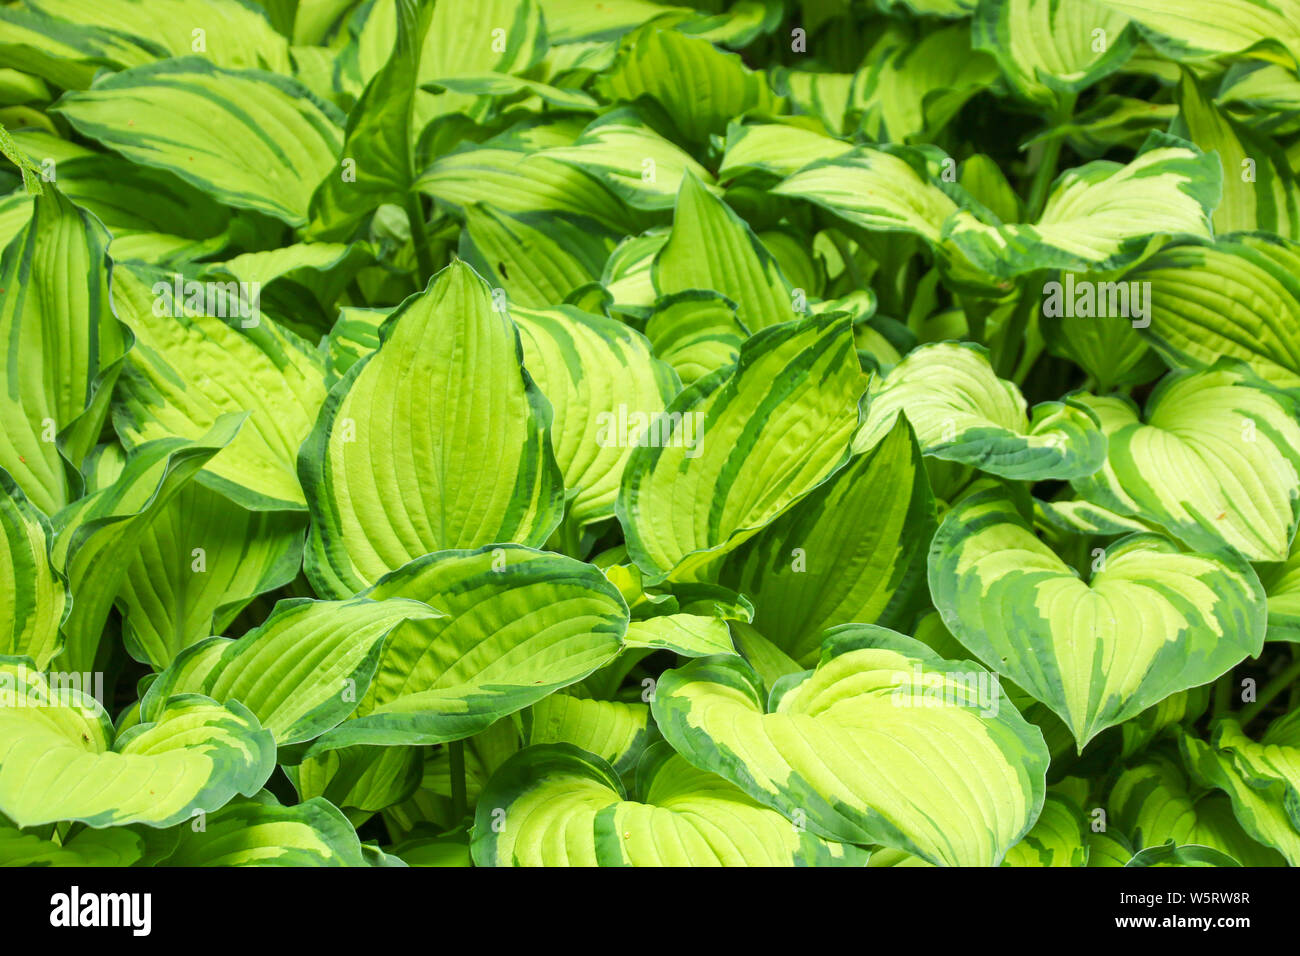 Close up detail in fresh green ornamental hosta leaves growing in a formal garden to make a natural background Stock Photo